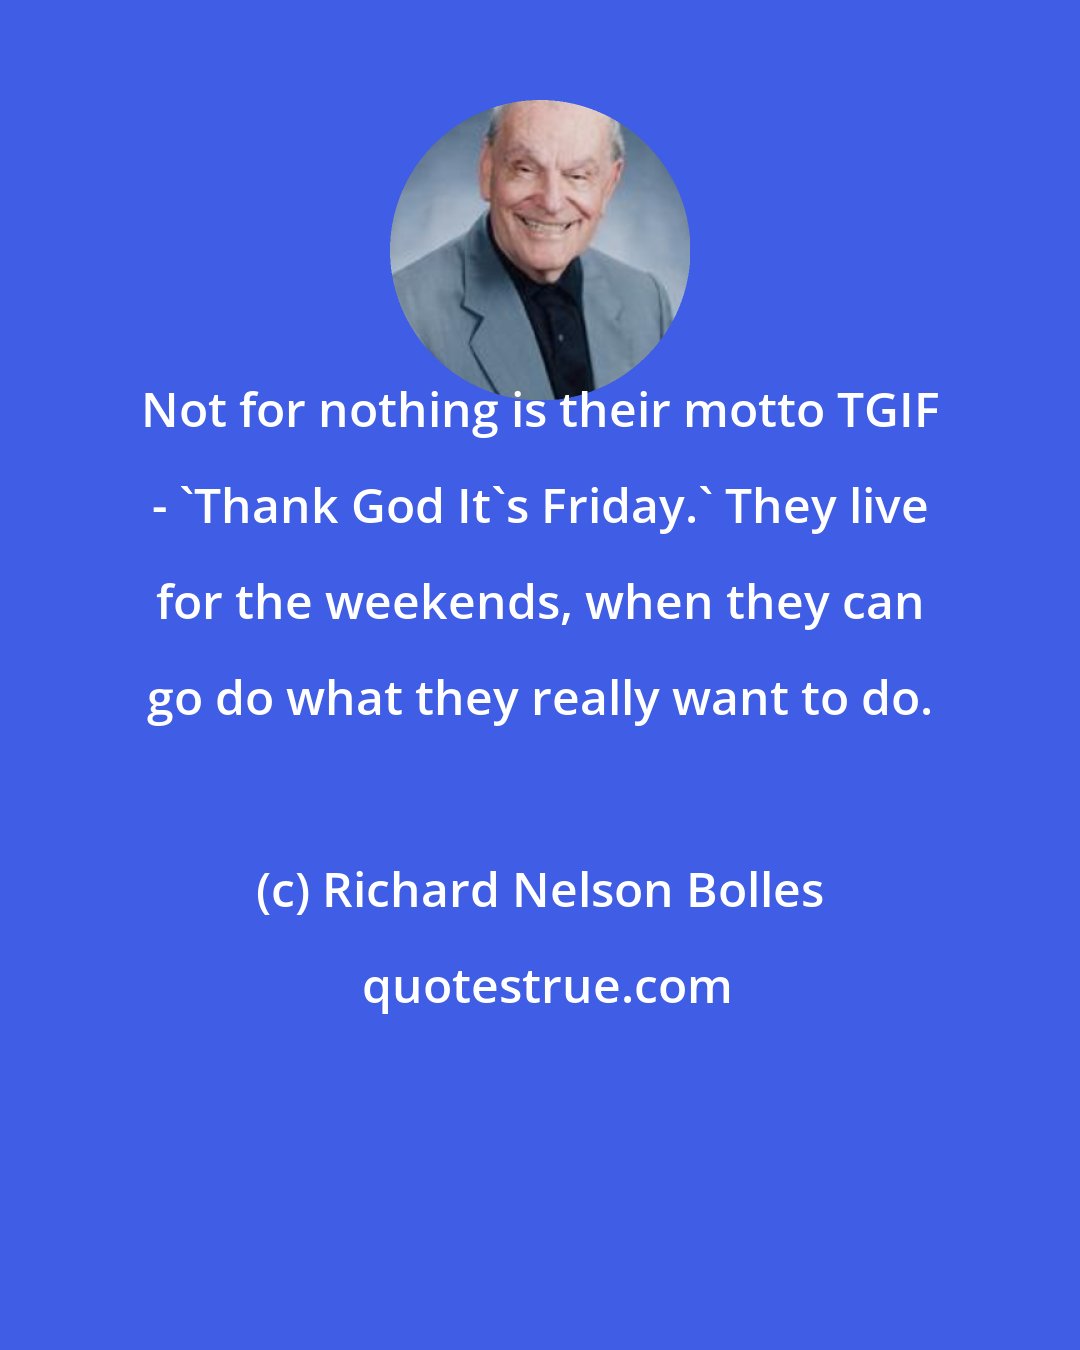 Richard Nelson Bolles: Not for nothing is their motto TGIF - 'Thank God It's Friday.' They live for the weekends, when they can go do what they really want to do.